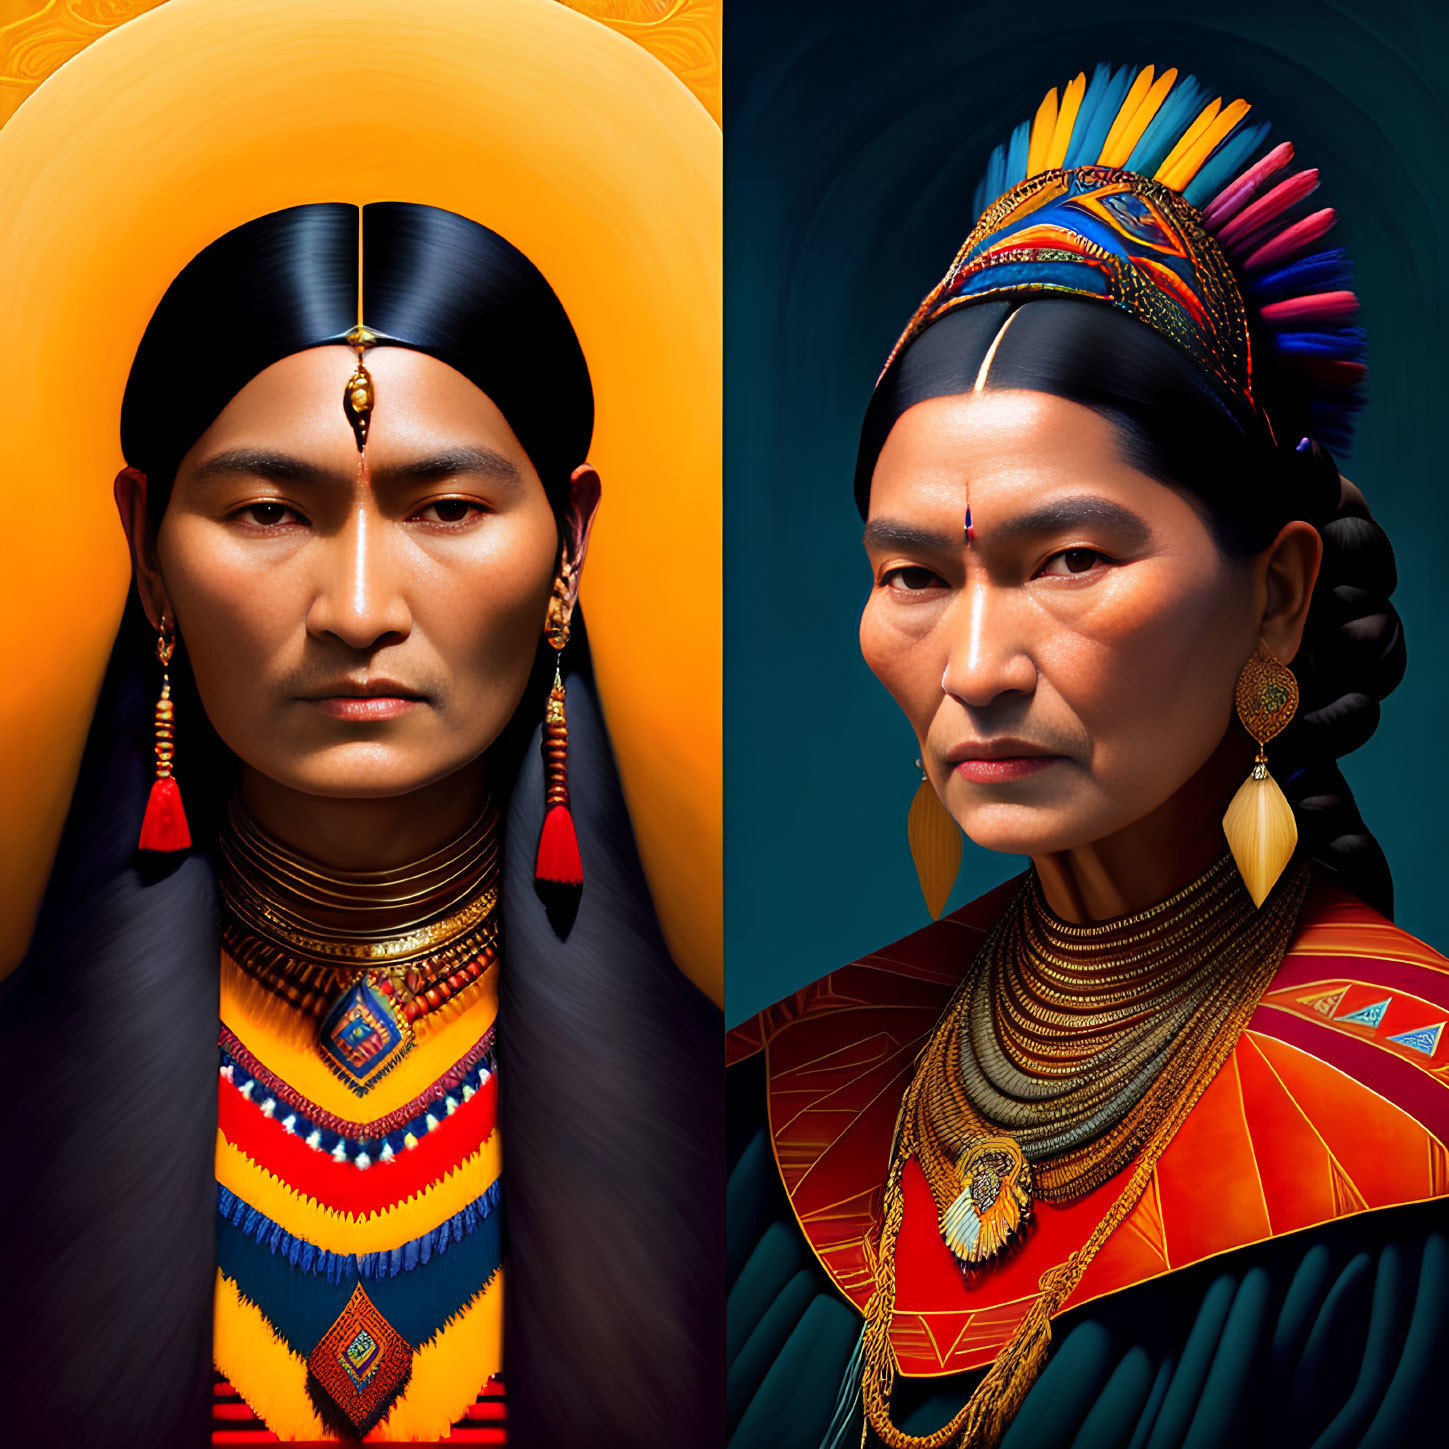 Dual Native American portraits in traditional attire with beadwork and feathers on golden background